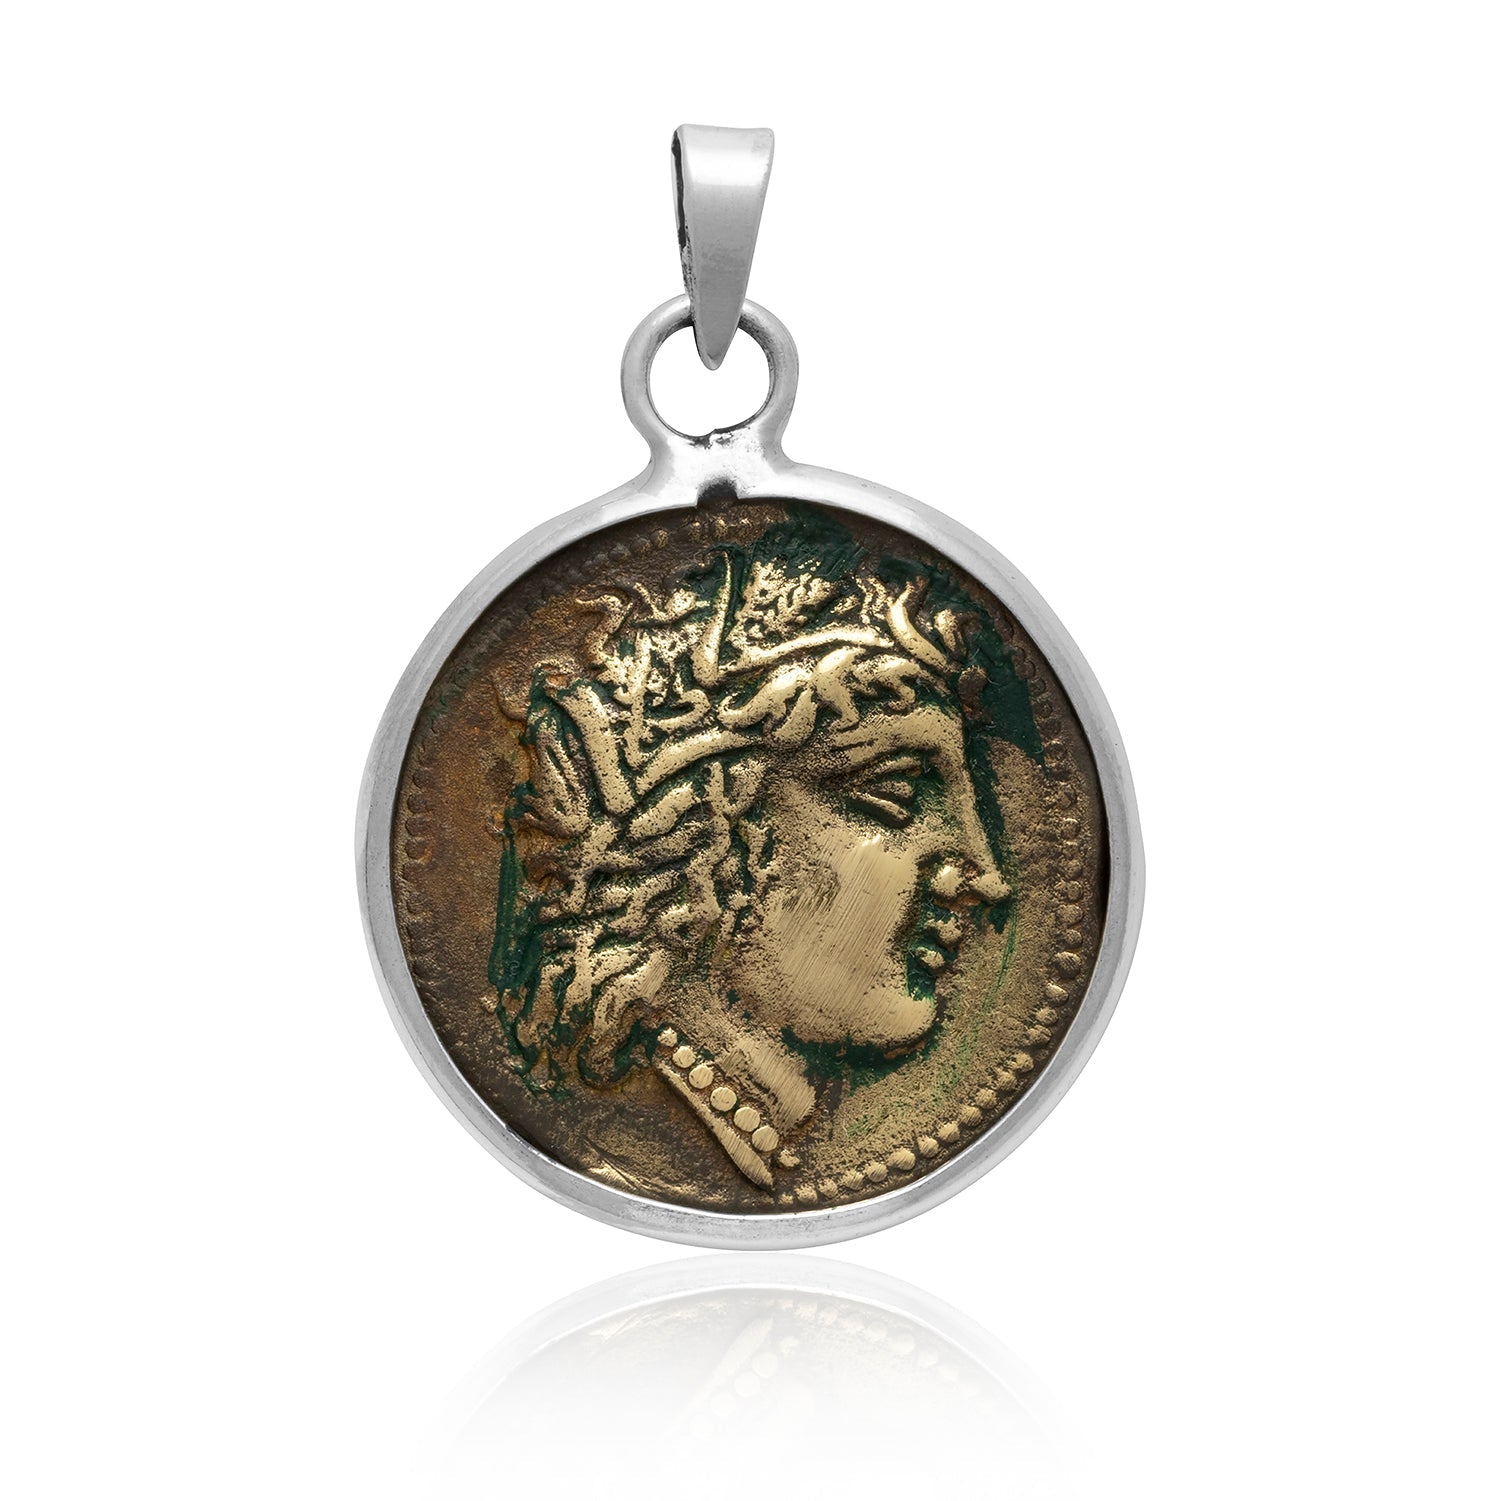 Sterling Silver and Brass Lucania-Metapontum Ancient Greek Coin